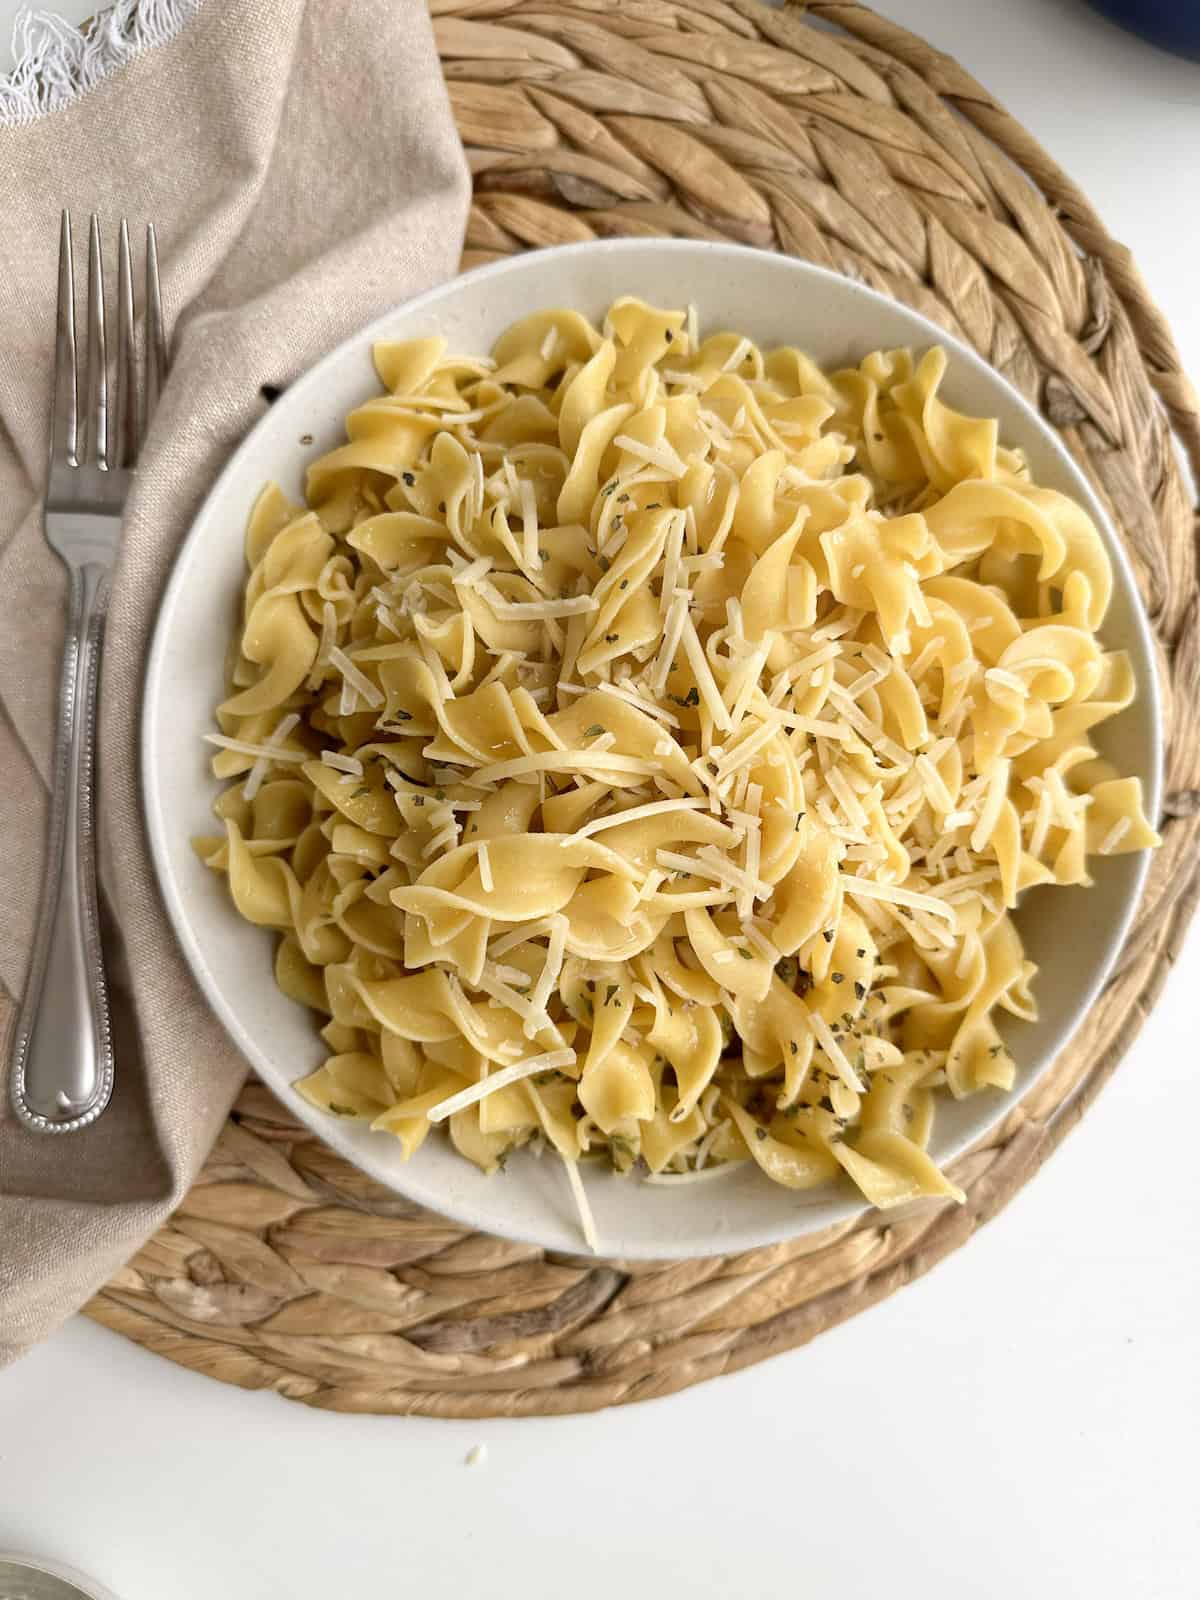 Buttered noodles in a bowl with a fork and napkin.